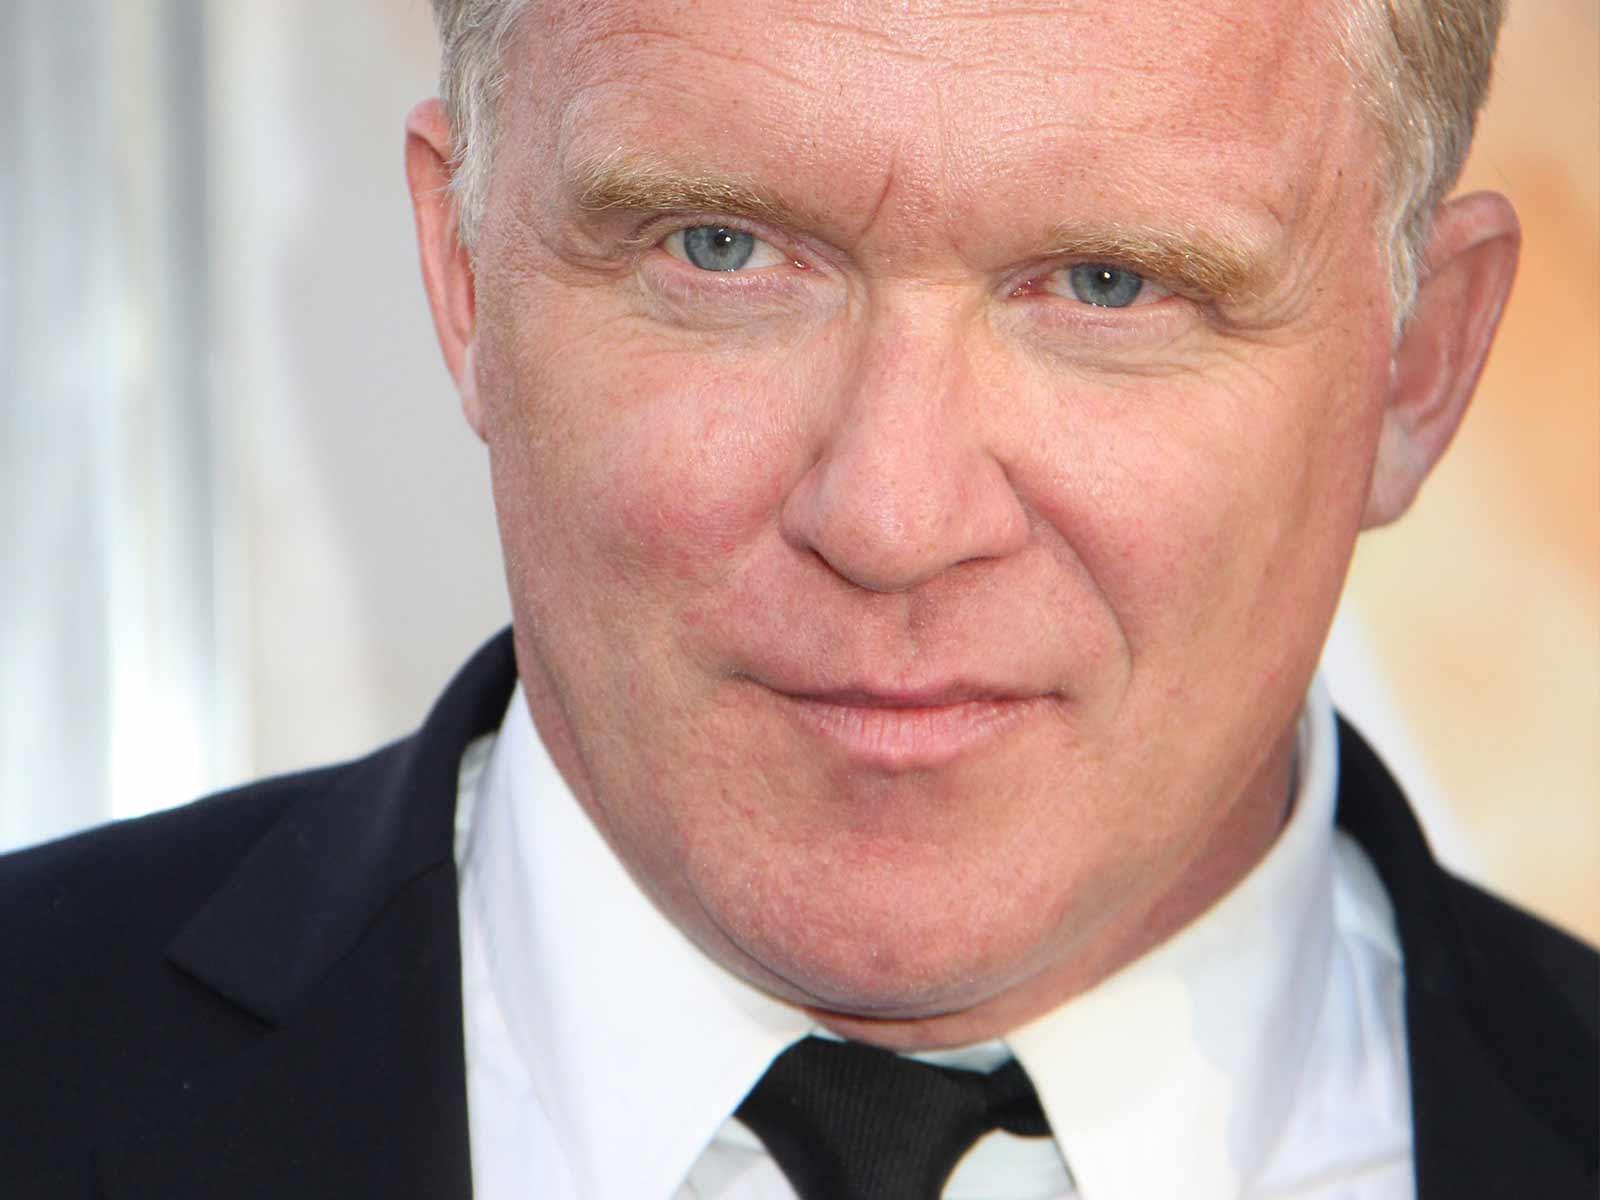 Anthony Michael Hall Cuts Plea Deal In Neighbor Attack, Avoids Jail Time